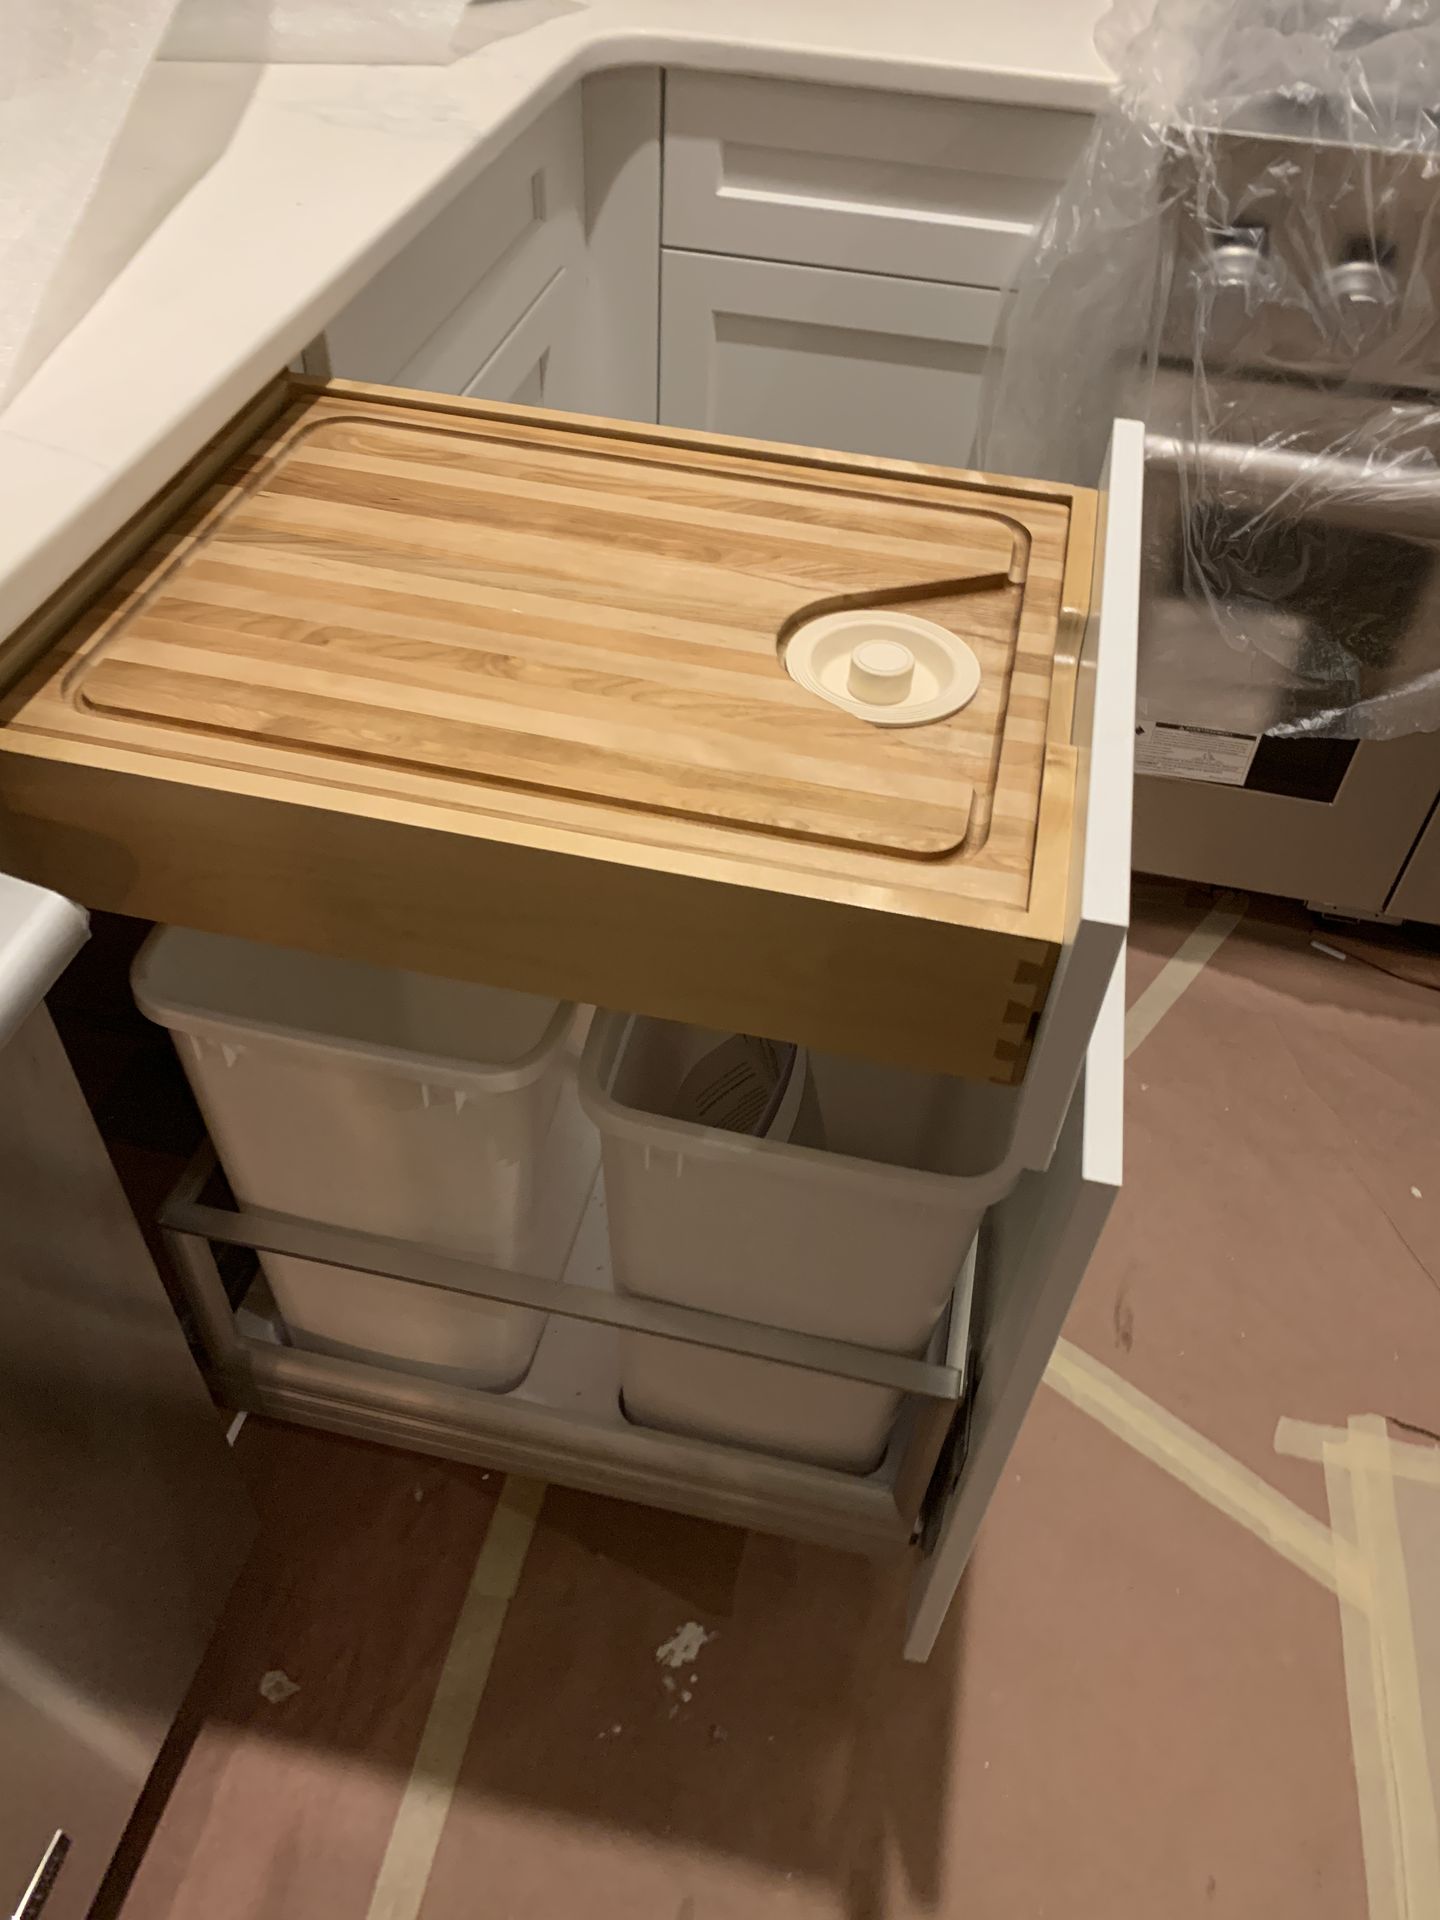 Cutting Board over Trash Pull-Out